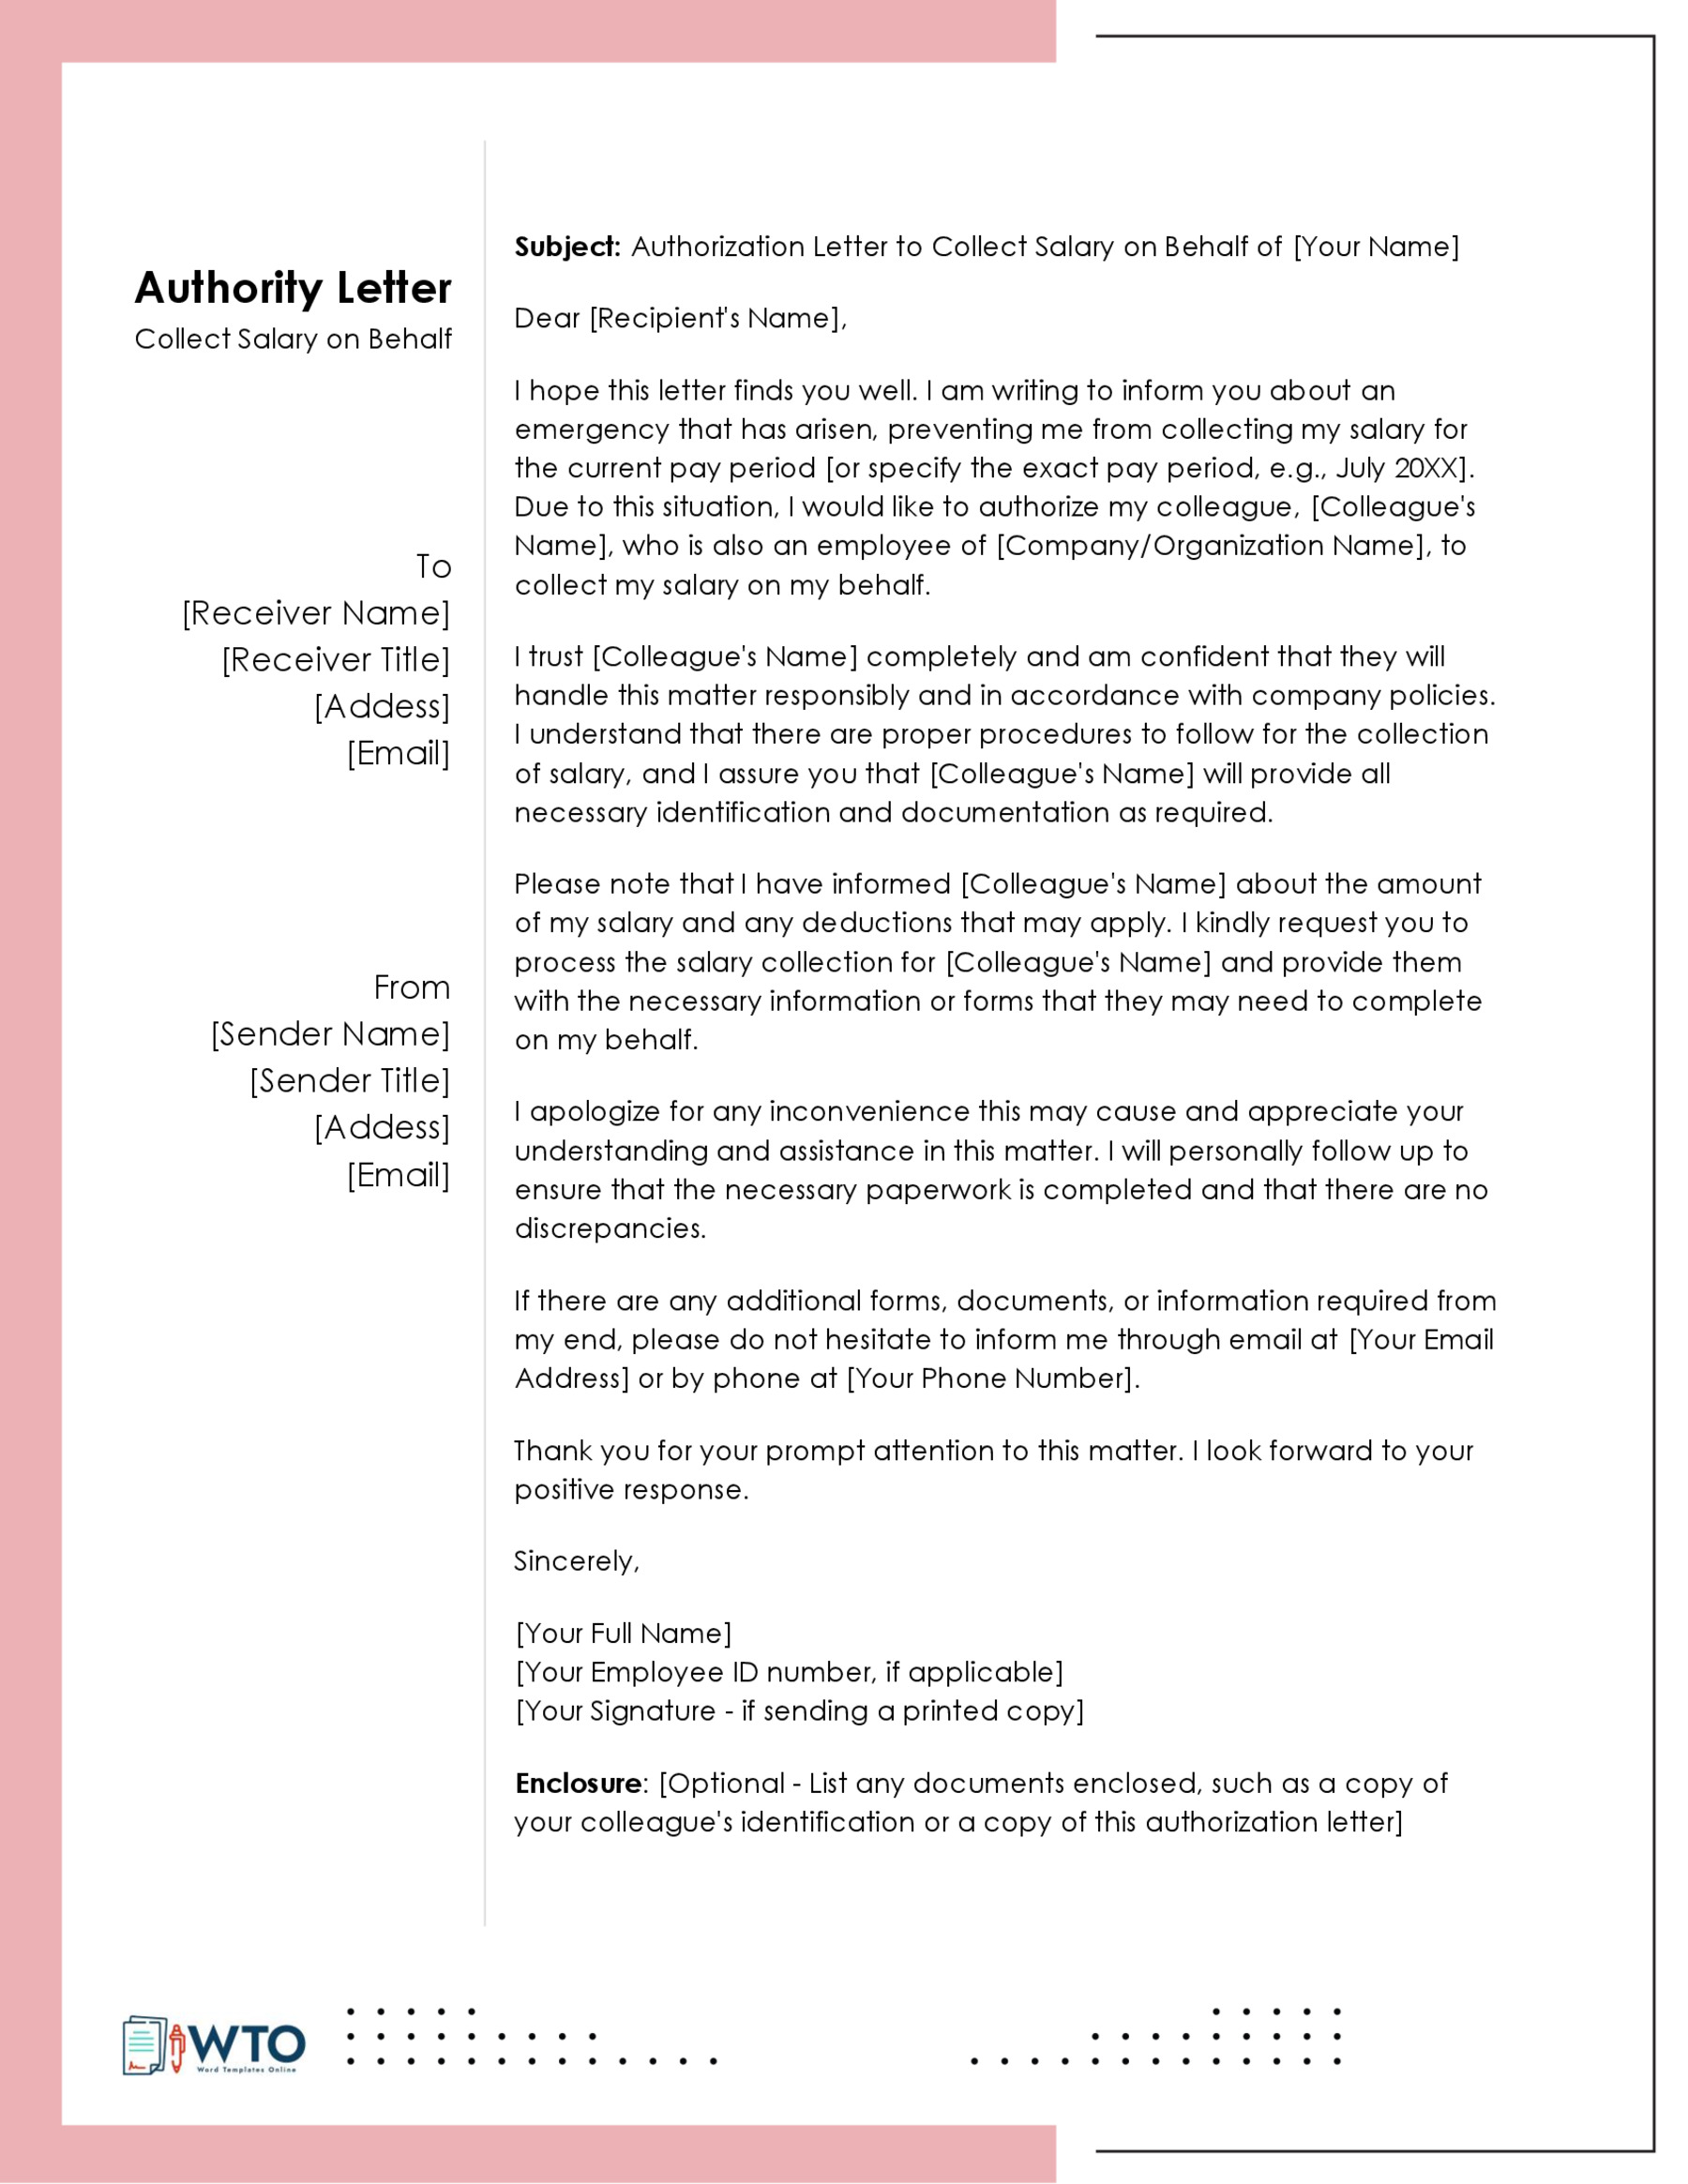 Authorization Letter to Collect Salary Template-Downloadable word format